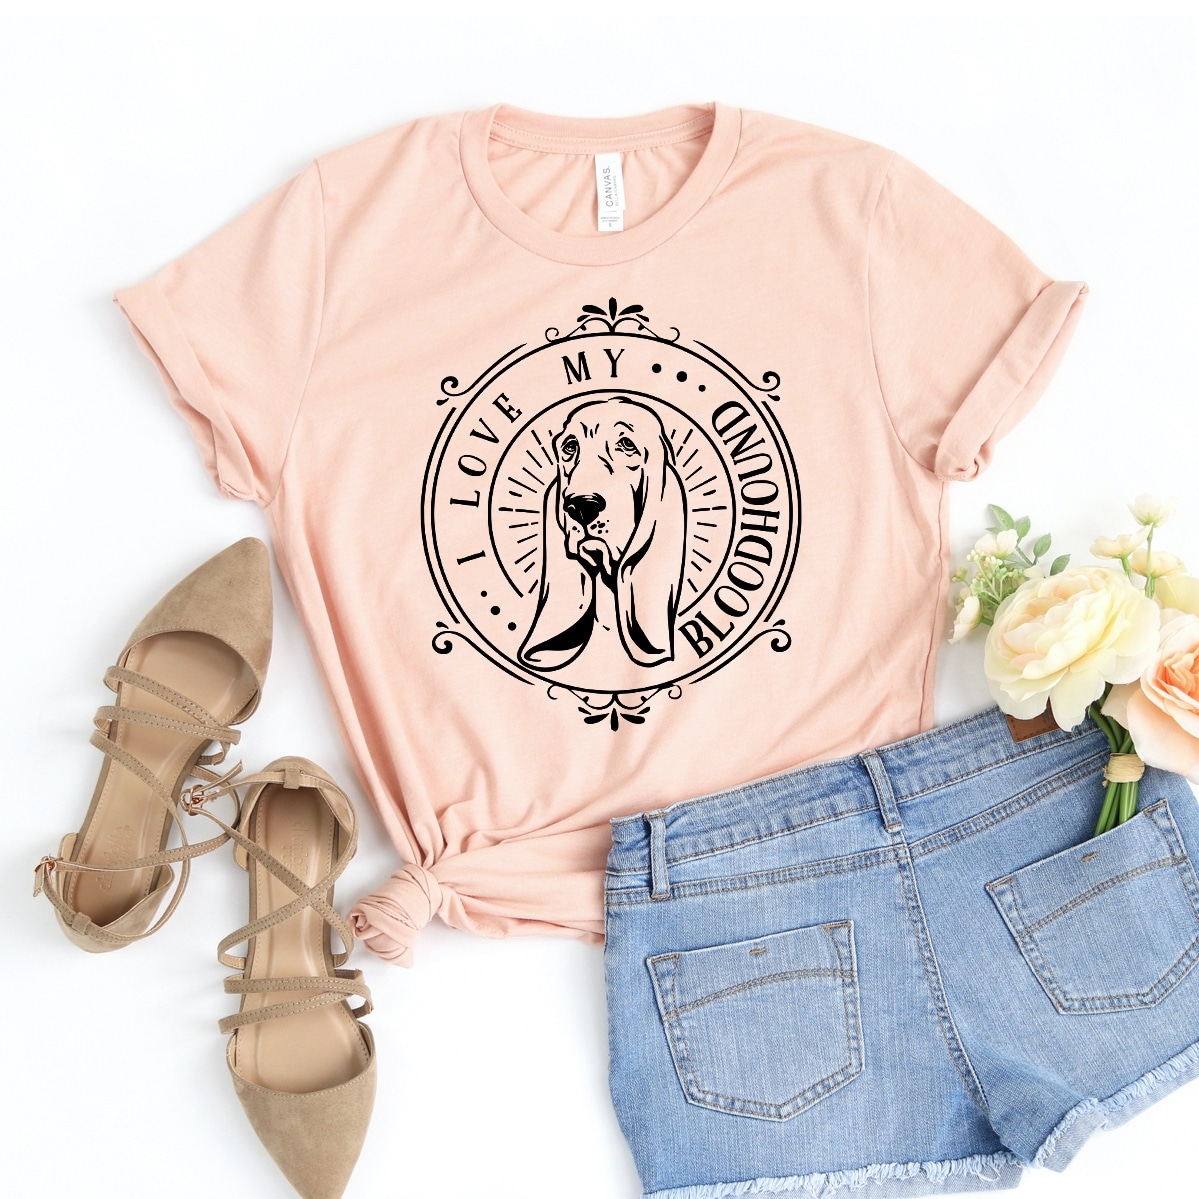 I Love My Bloodhound T-Shirt, Dog Mom Shirt, Women's Fur Mama Tee, Gift For Her, Animal Lover Tshirt, Paw Rescuer Top,